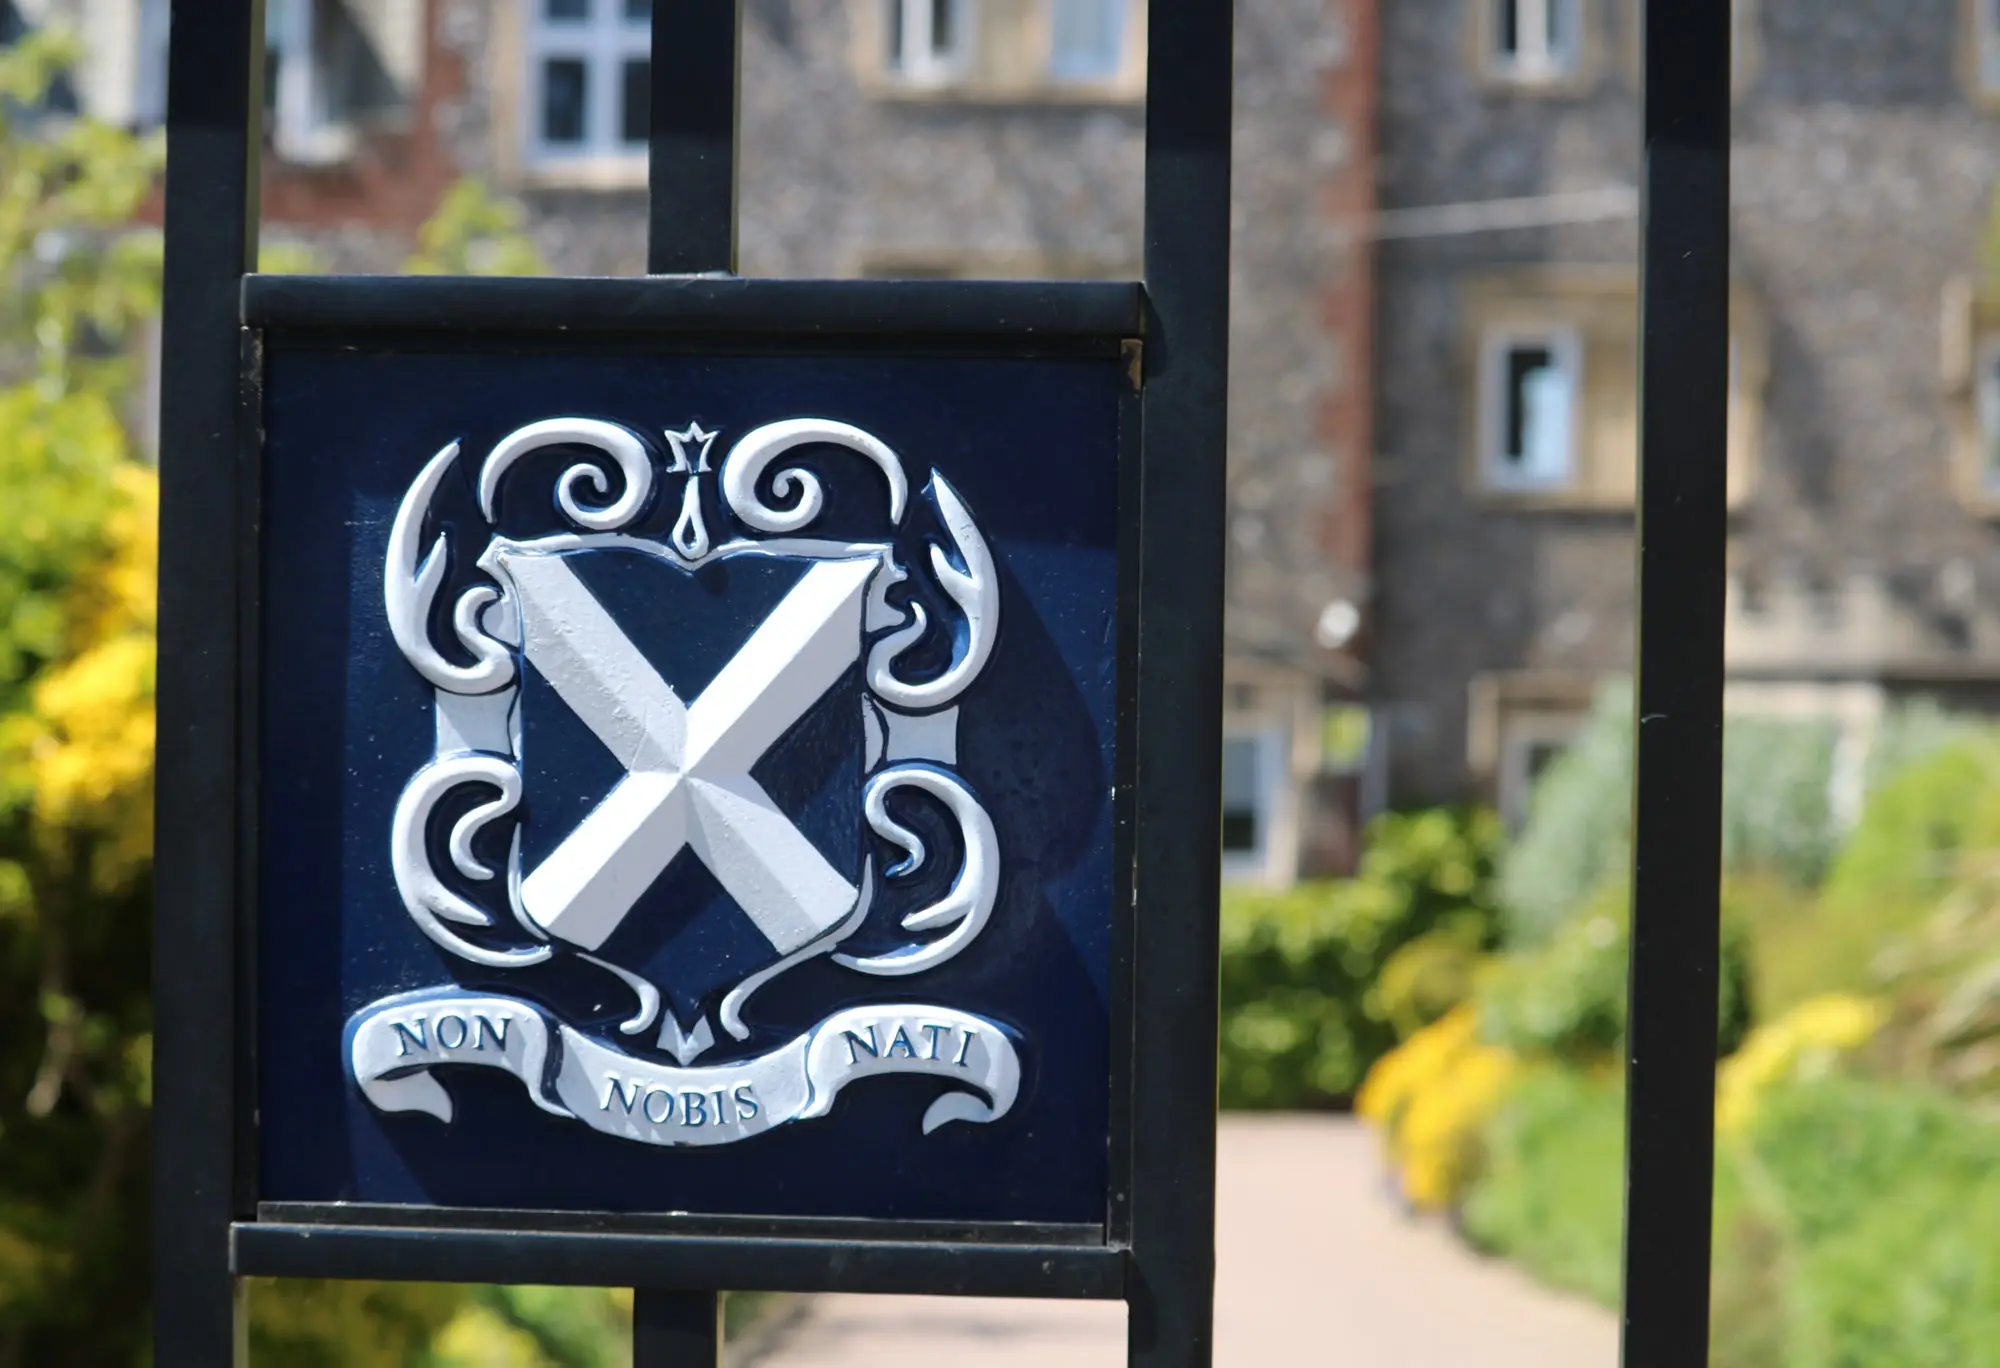 Image of an iron gate outside of St. Albans School in Hertfordshire, England. 